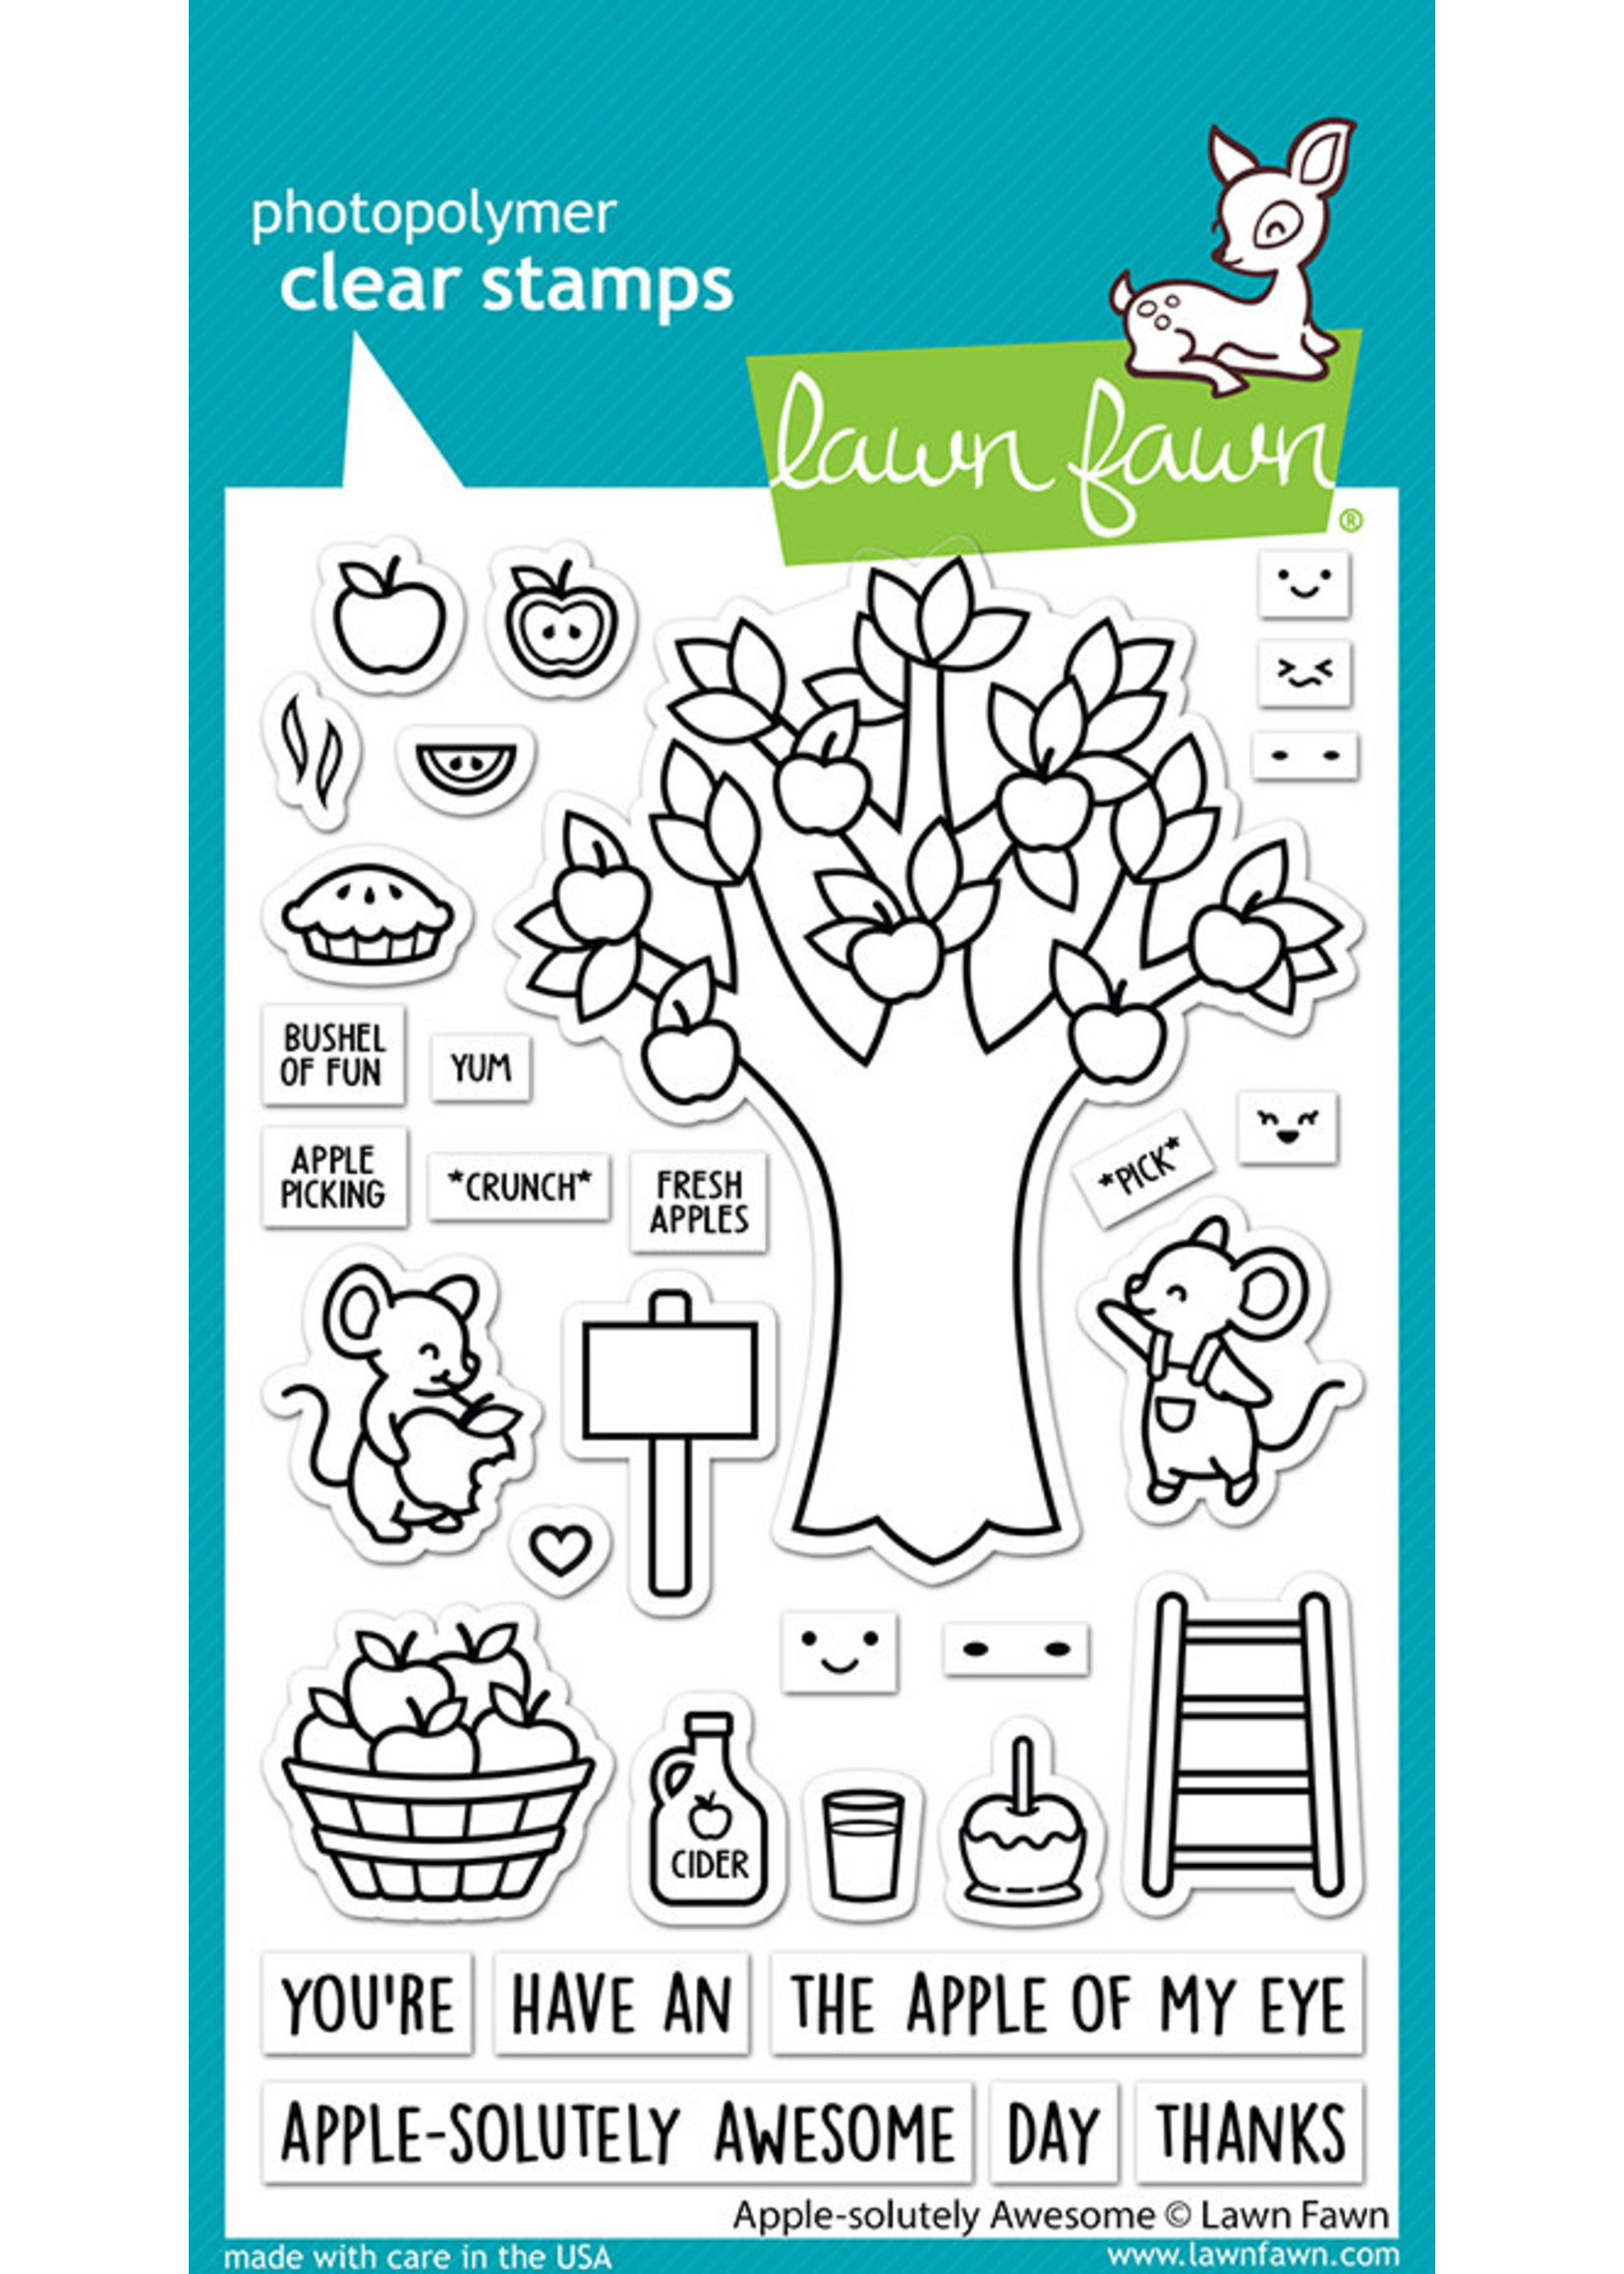 Lawn Fawn apple-solutely awesome stamp